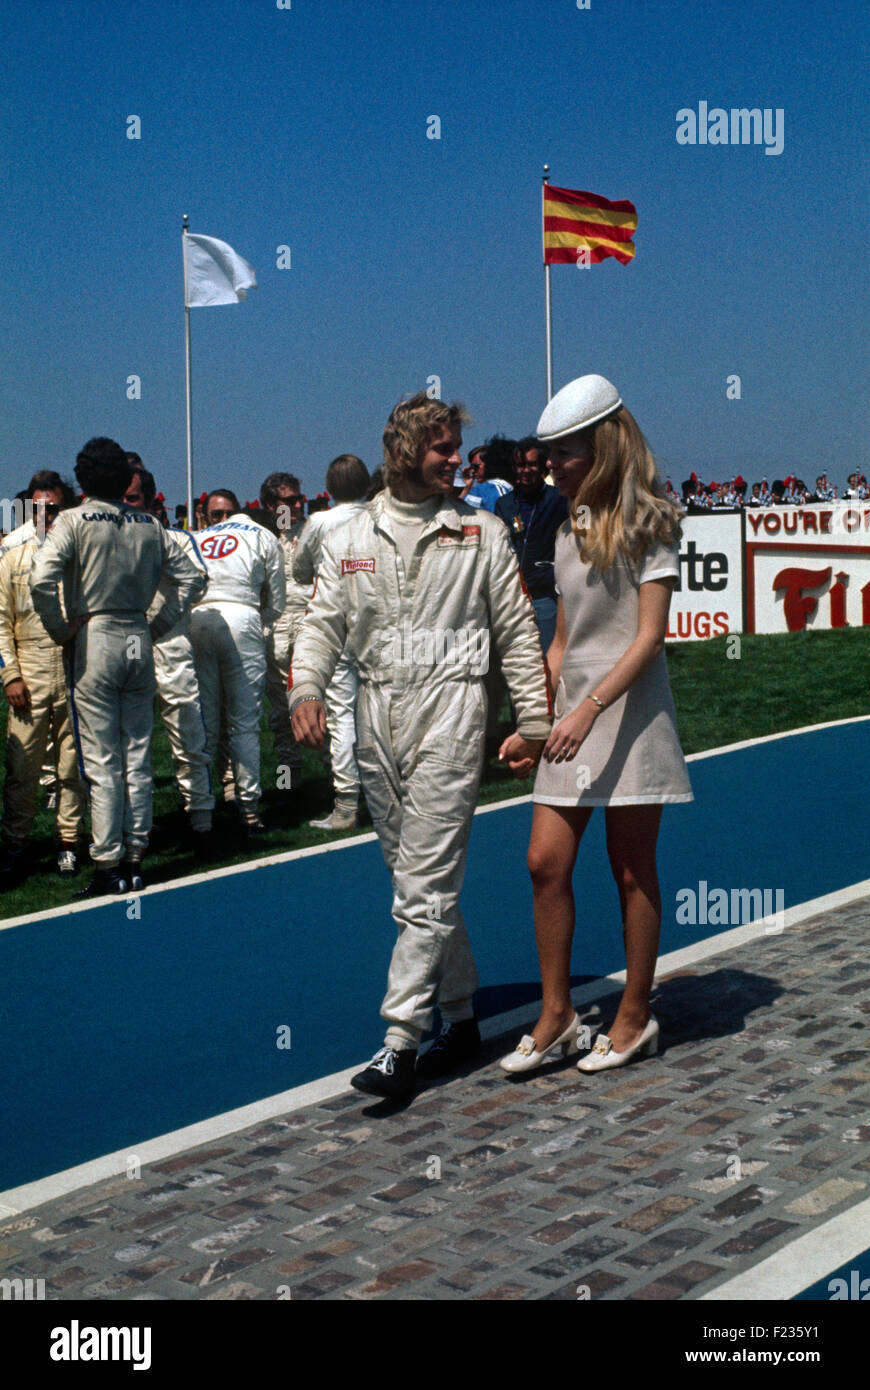 Reine Wisell at the Questor Grand Prix at the Ontario Motor Speedway in California, USA, on 28 March 1971.